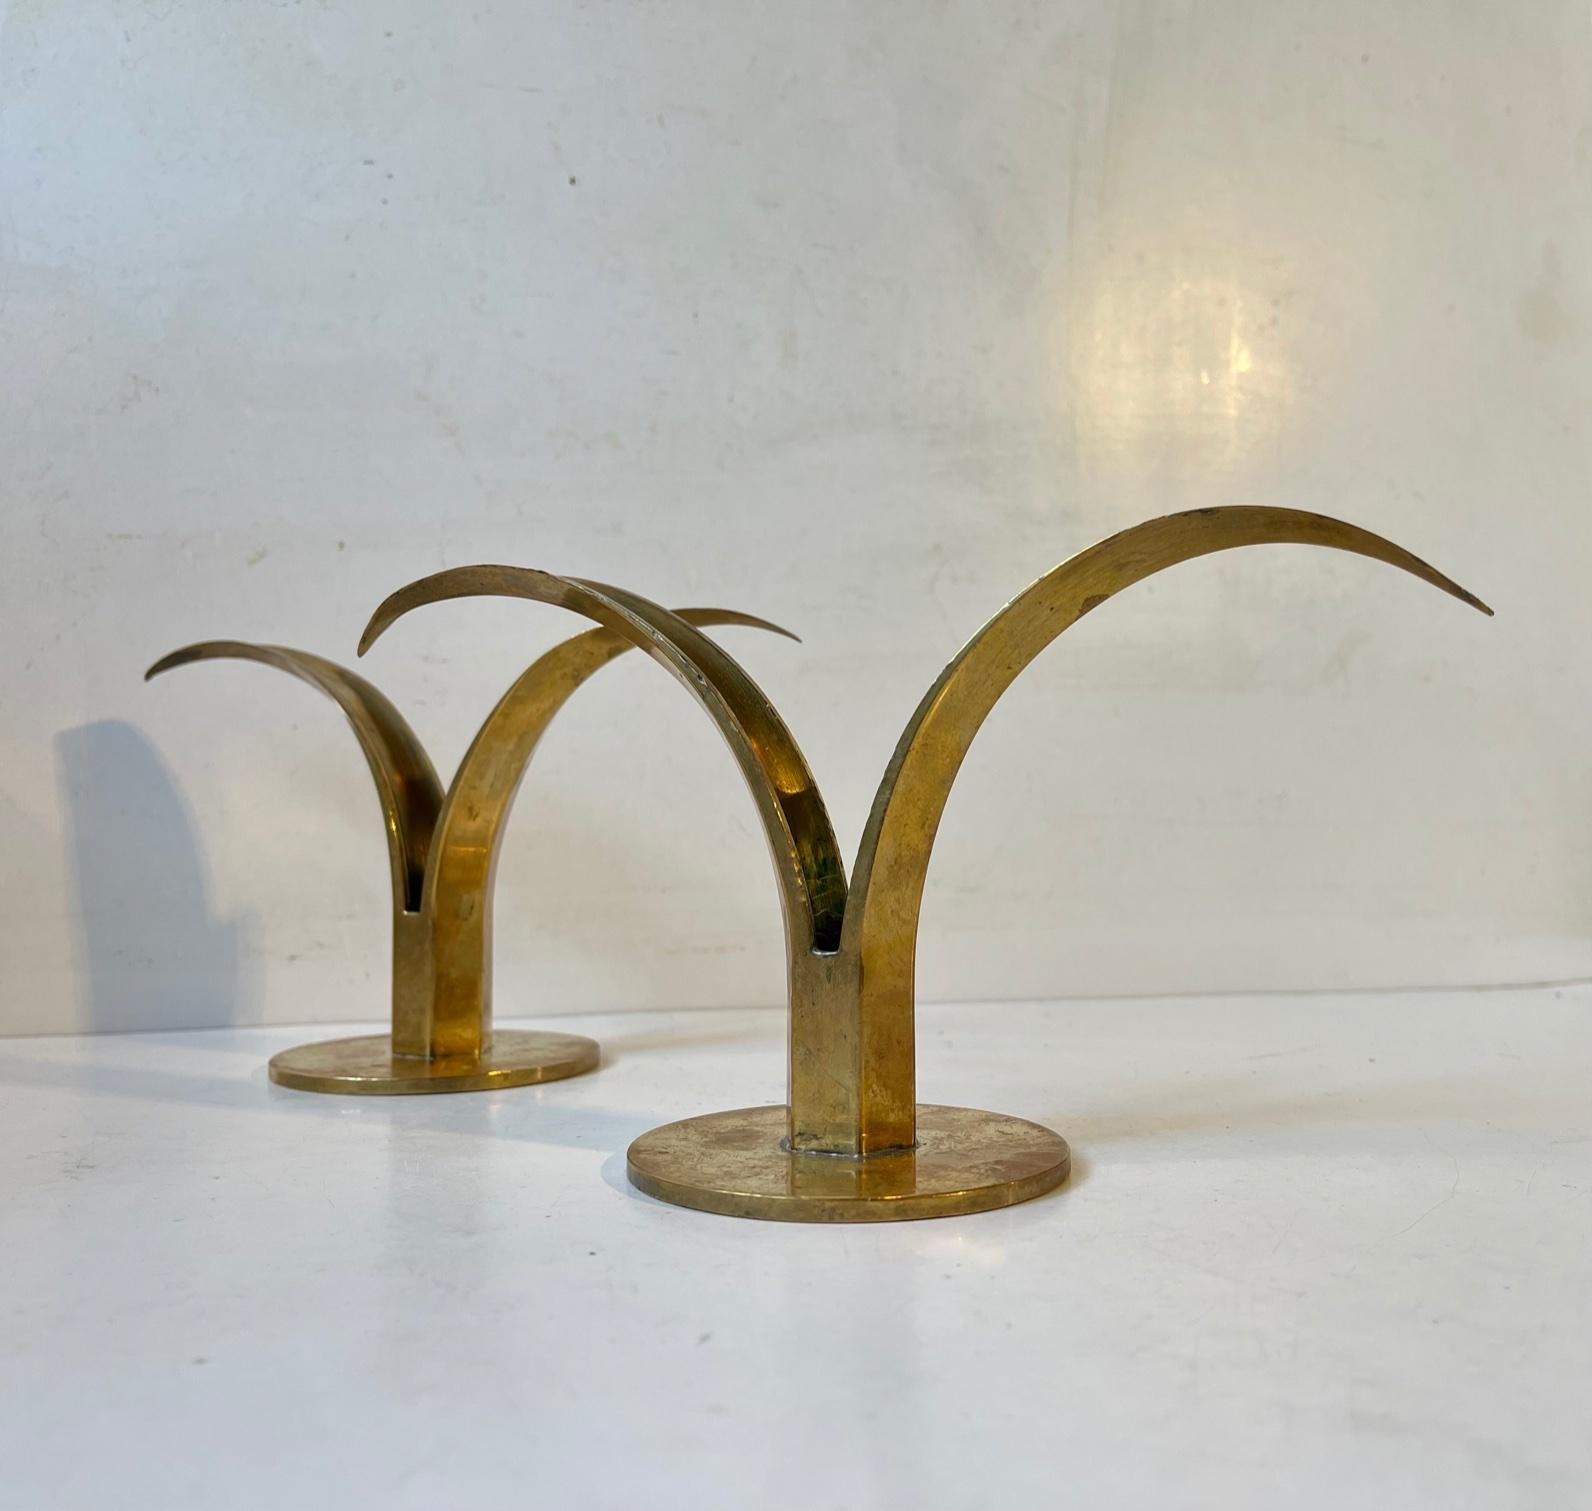 A pair of early 1950s brass candleholders designed by Ivar Ålenius Björk. The model is called the Liljan or 